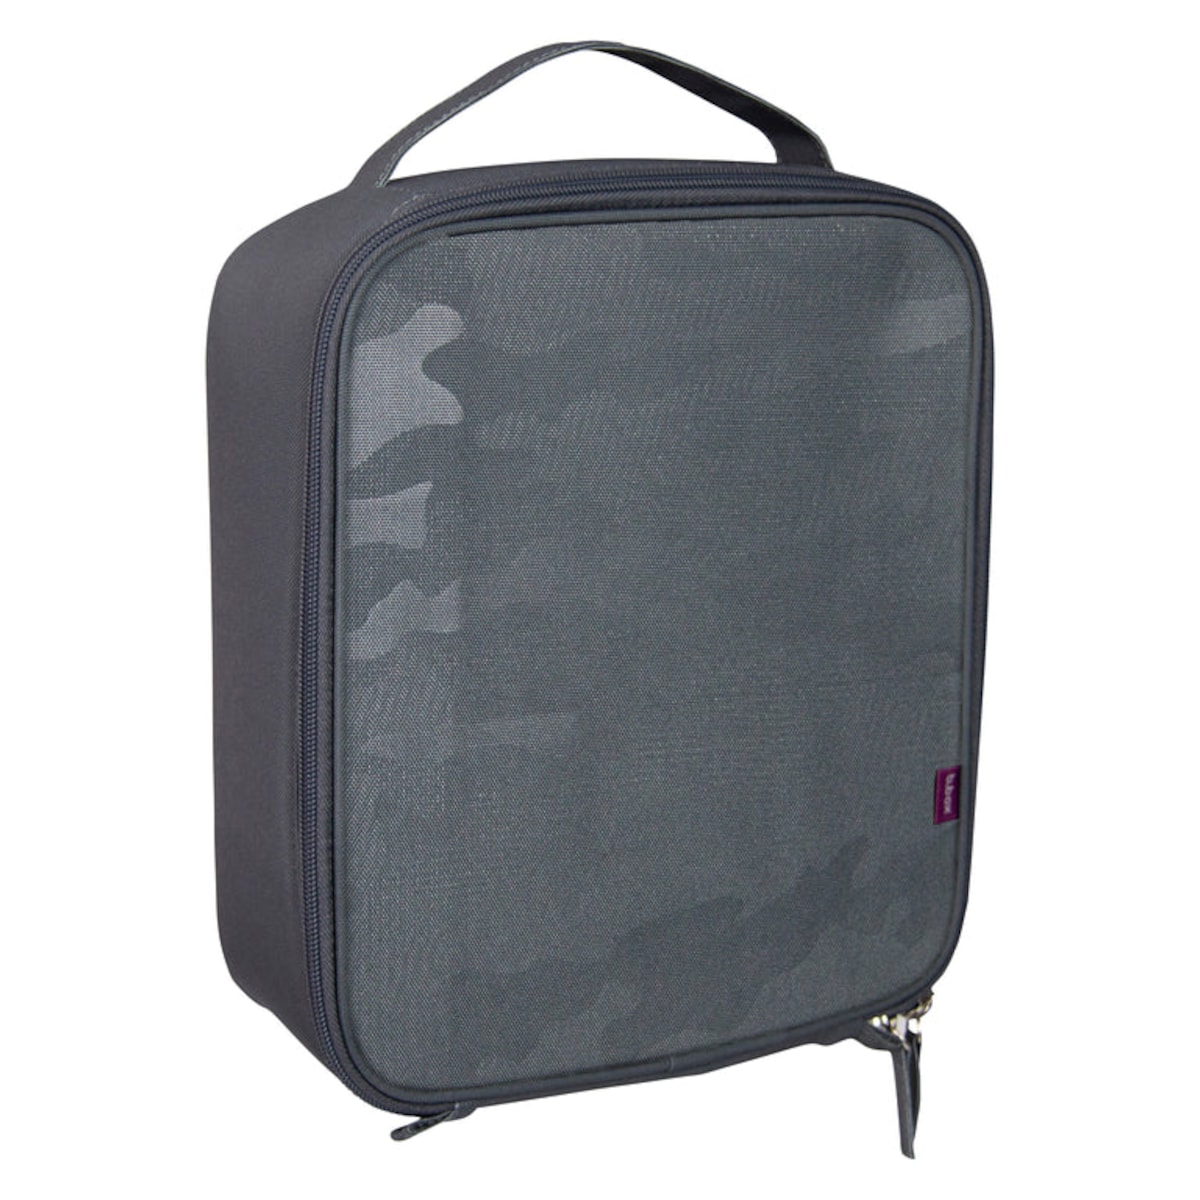 B.Box Insulated Lunch Bag Graphite